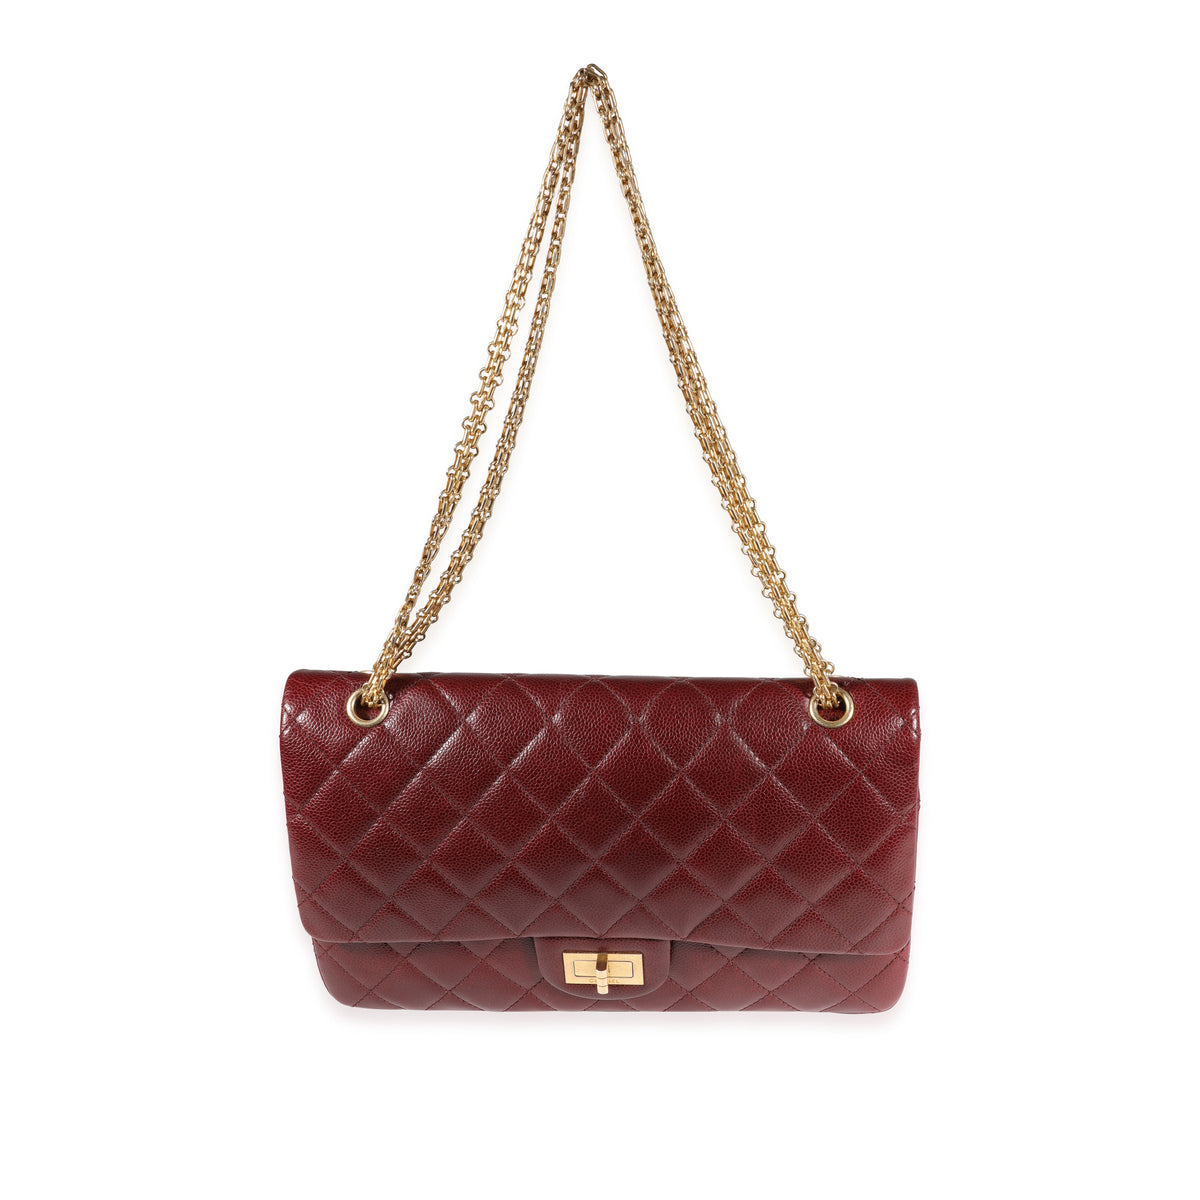 Chanel Burgundy Quilted Caviar Reissue 2.55 227 Double Flap Bag, myGemma